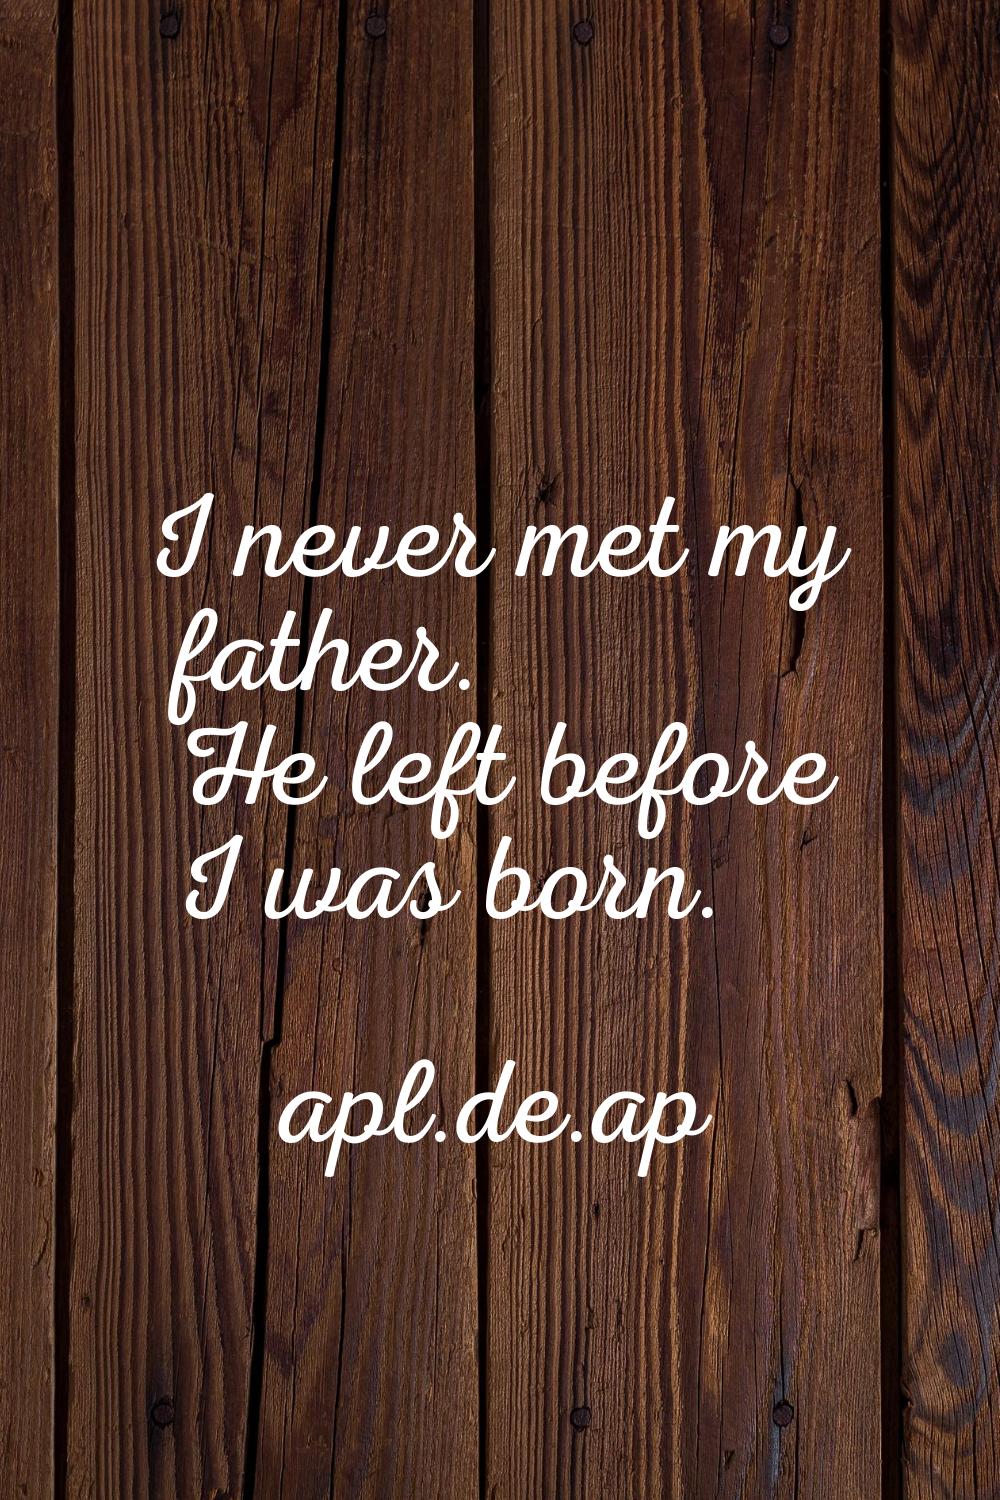 I never met my father. He left before I was born.